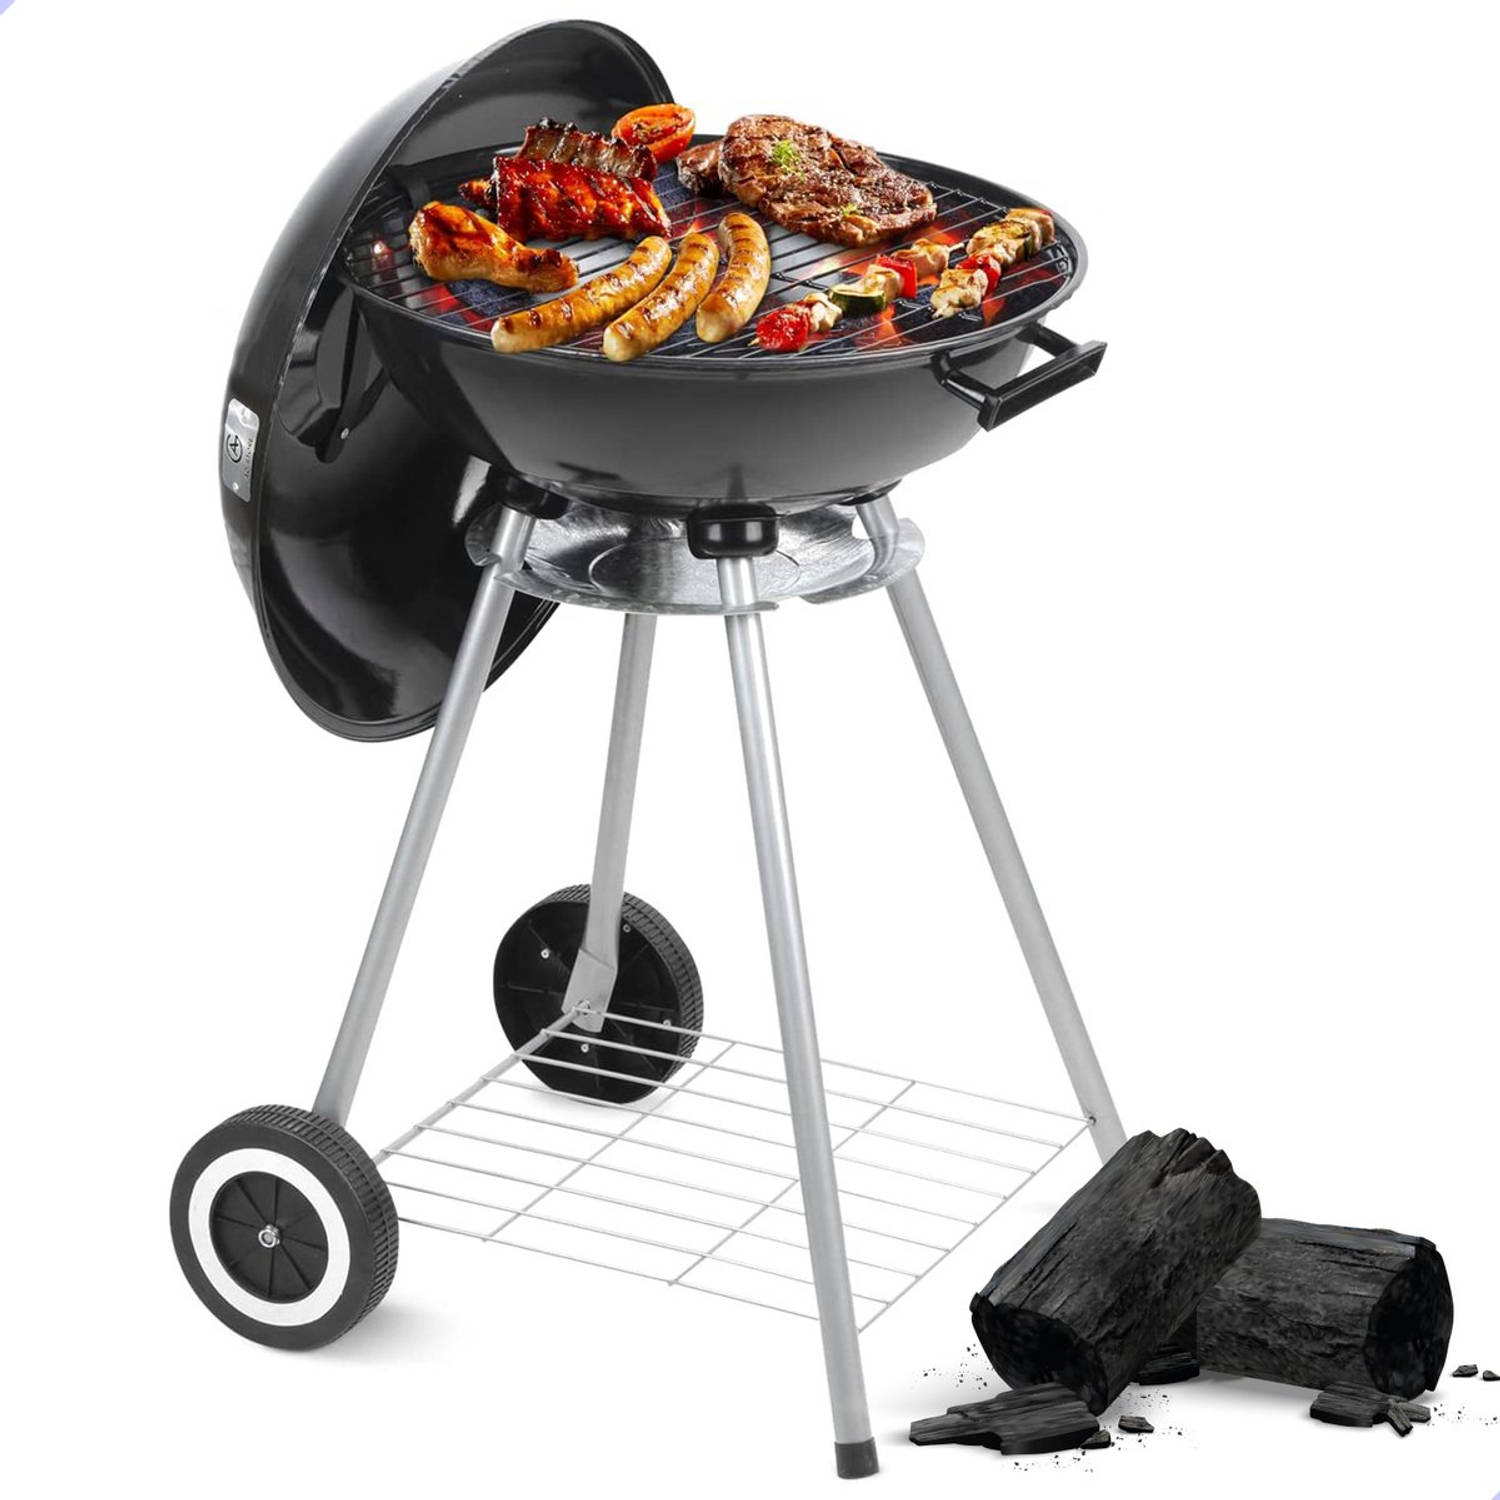 AG barbecue Ø 46 cm Houtskoolbarbecues Kogelbarbecue incl. Thermometer temperatuur roestvrij Ronde Barbecue In